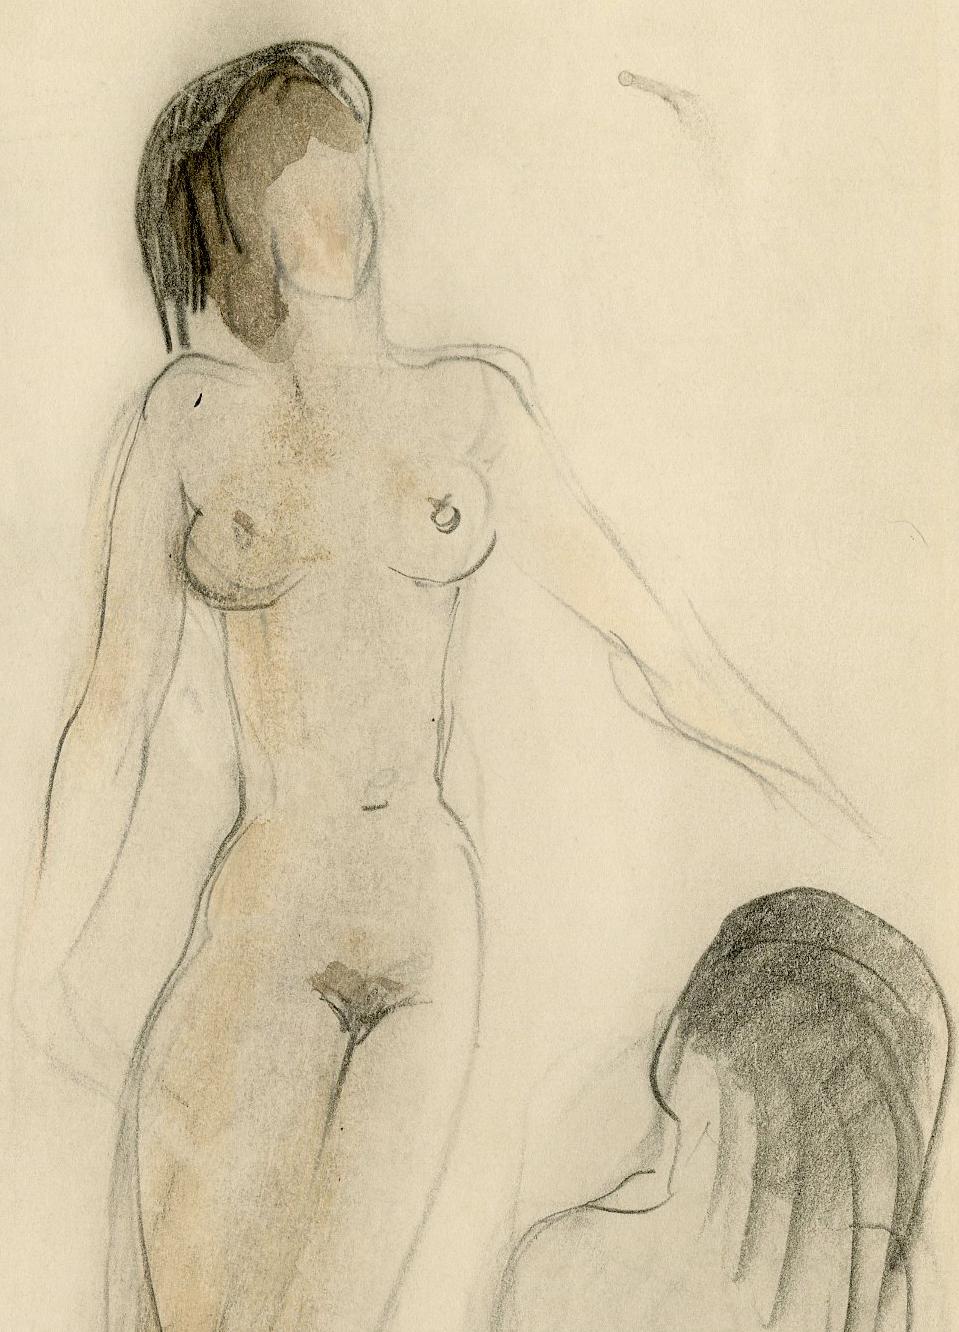 Untitled (Two Standing Nudes, one seated nude)
Graphite on wove paper, heightened with color, c. 1930
Unsigned
From a sketchbook created while the artist was working in Paris
Condition: Very good
Provenance: Estate of the Artist
                    